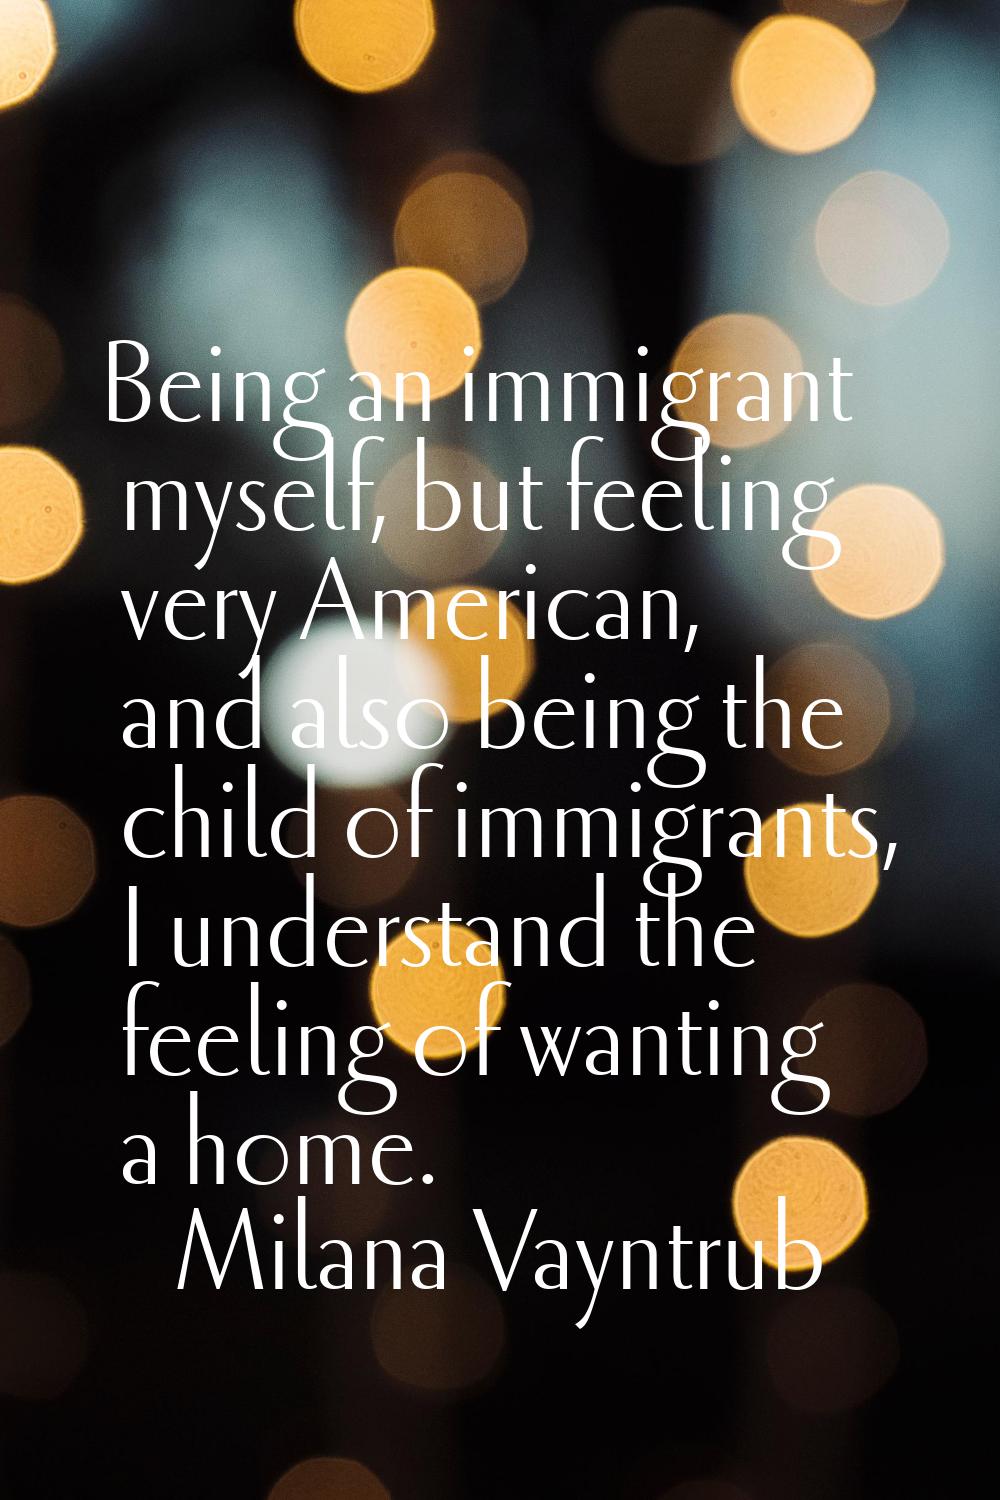 Being an immigrant myself, but feeling very American, and also being the child of immigrants, I und